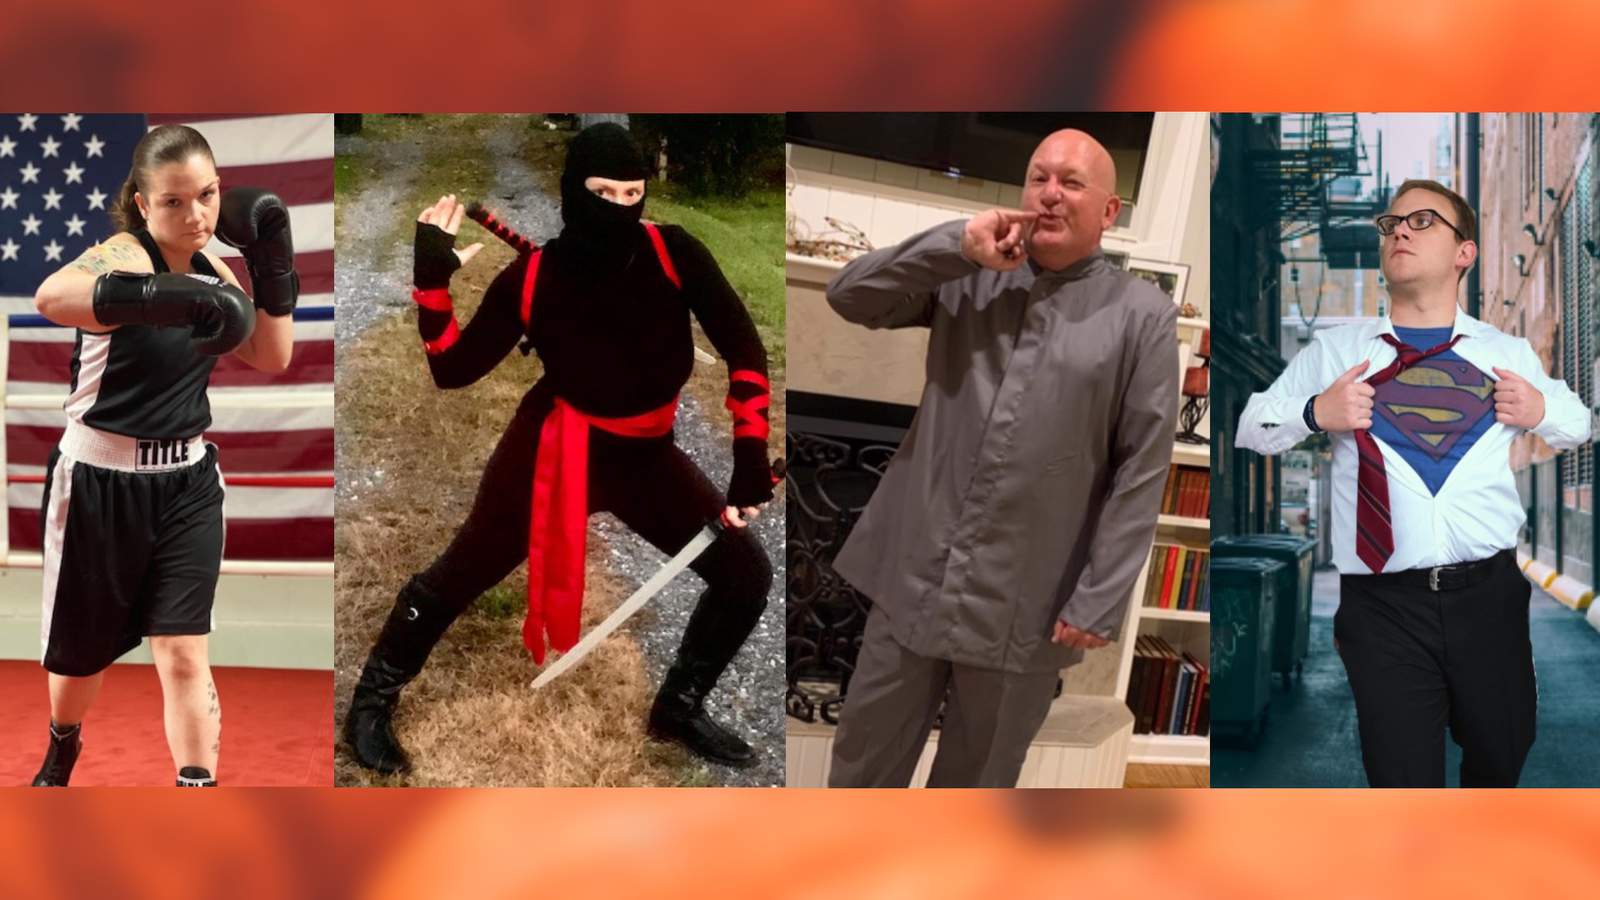 Cops in costume: Lexington police ask for your vote in contest